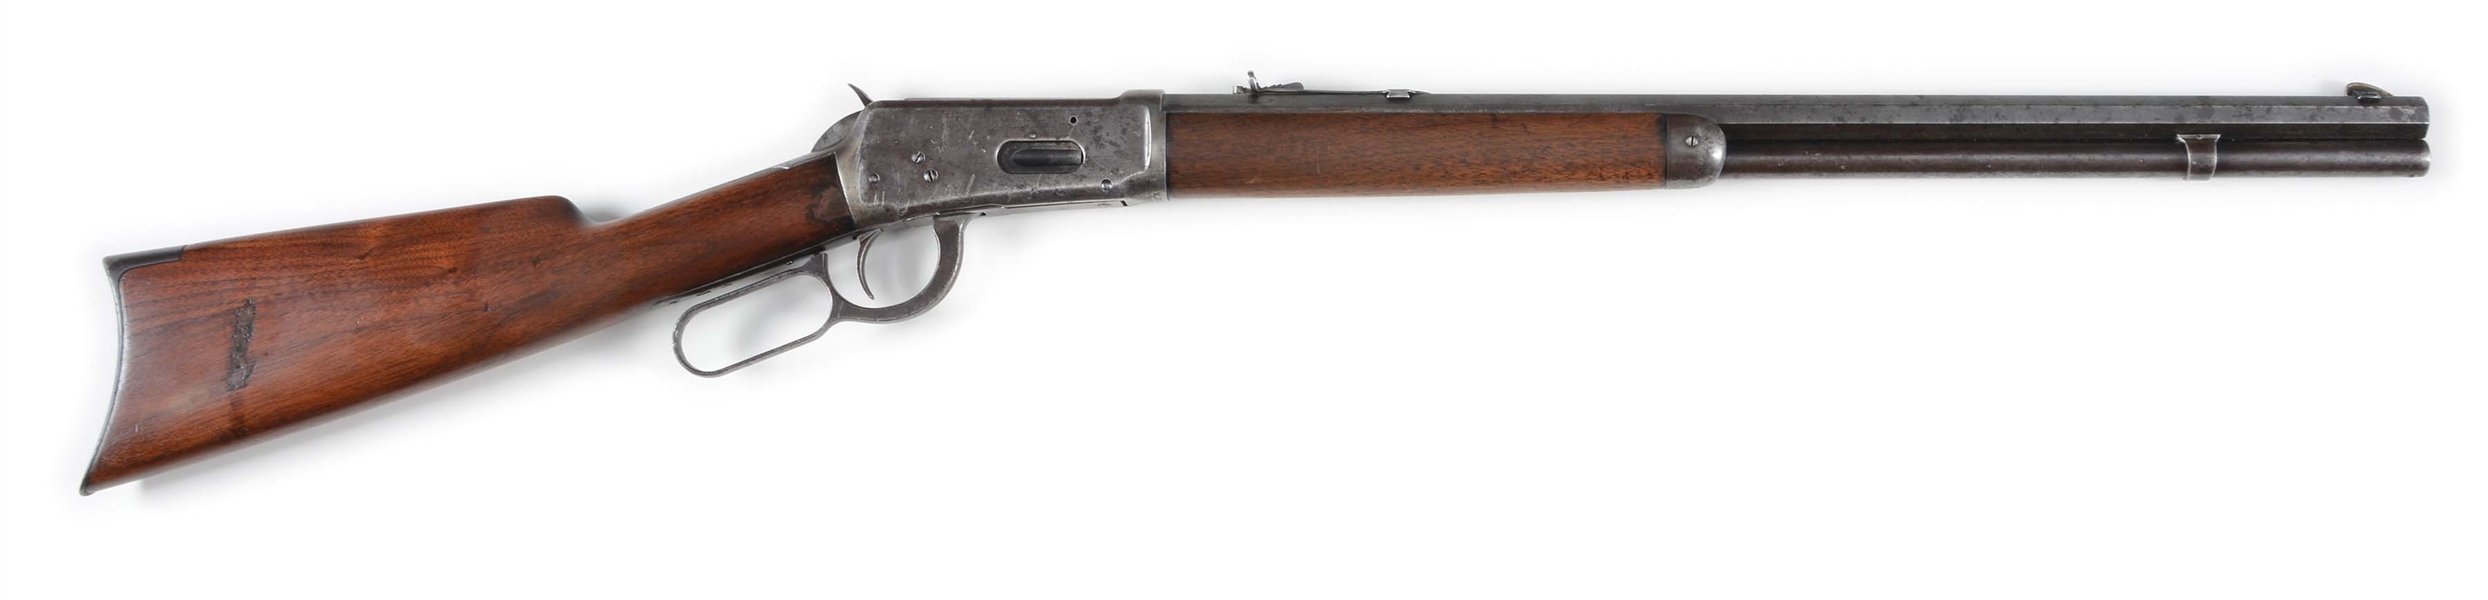 (C) UNUSUAL WINCHESTER MODEL 1894 LEVER ACTION RIFLE WITH FACTORY 22" BARREL (1902).